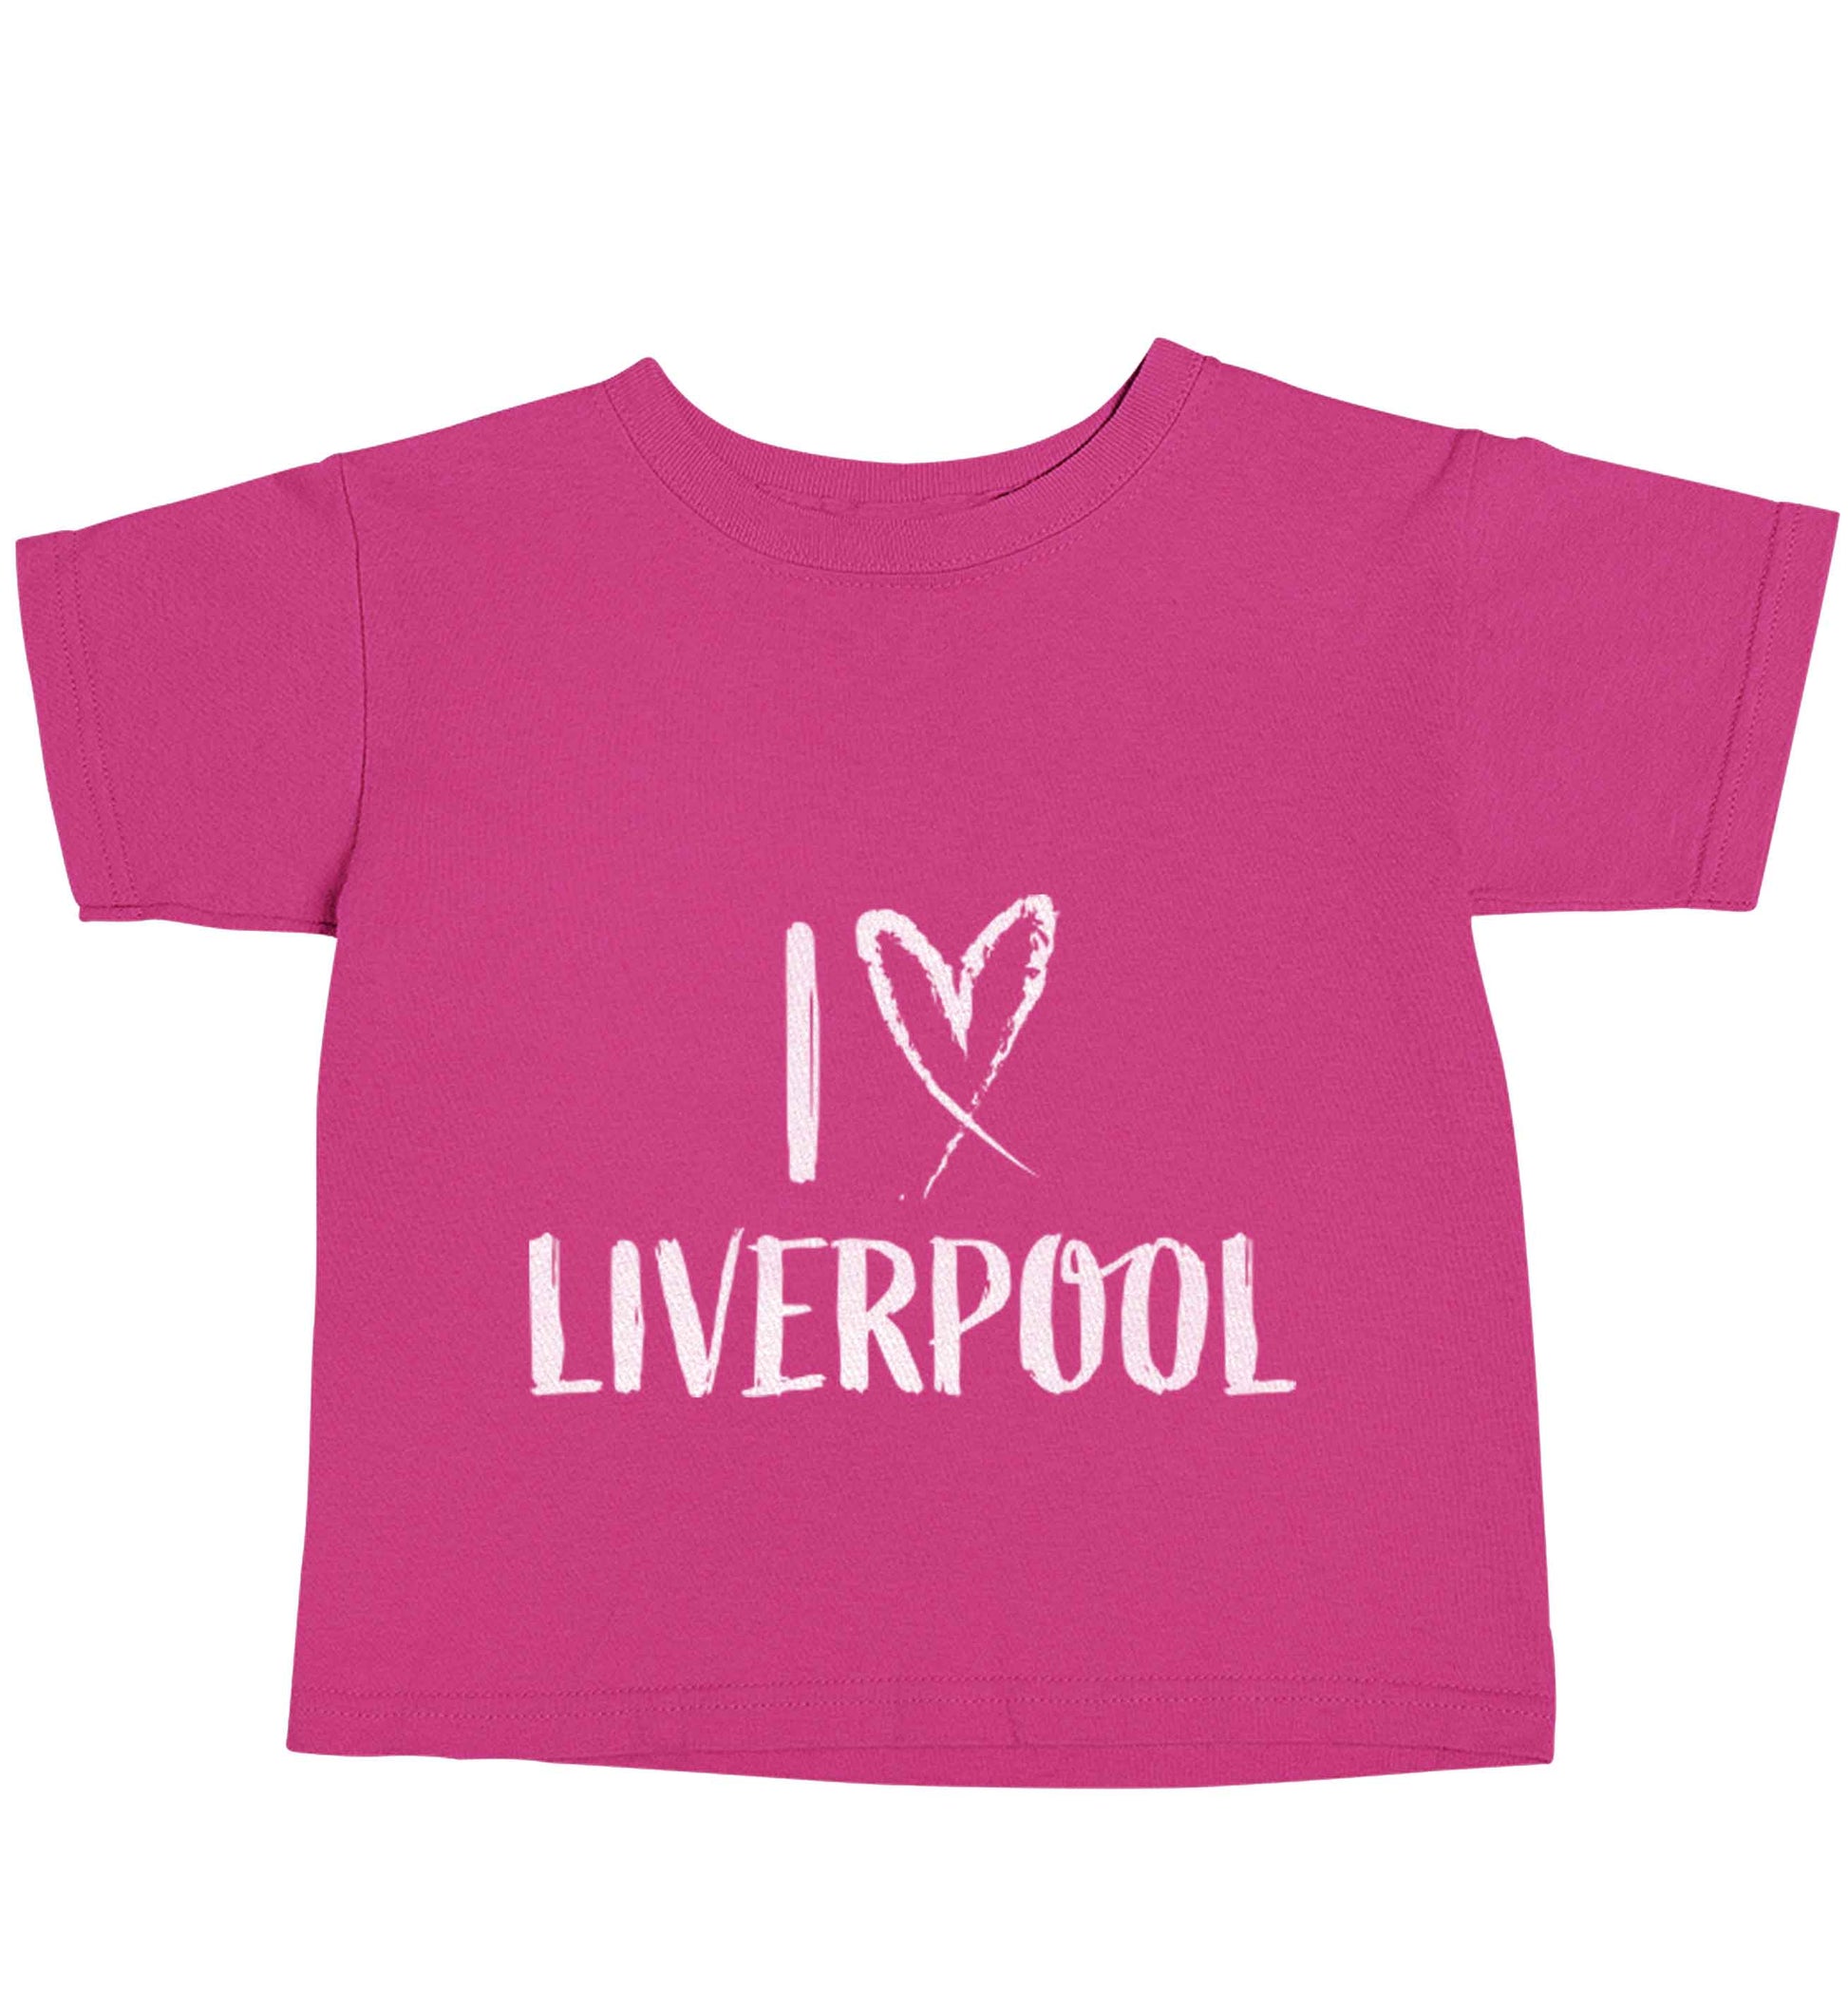 I love Liverpool pink baby toddler Tshirt 2 Years